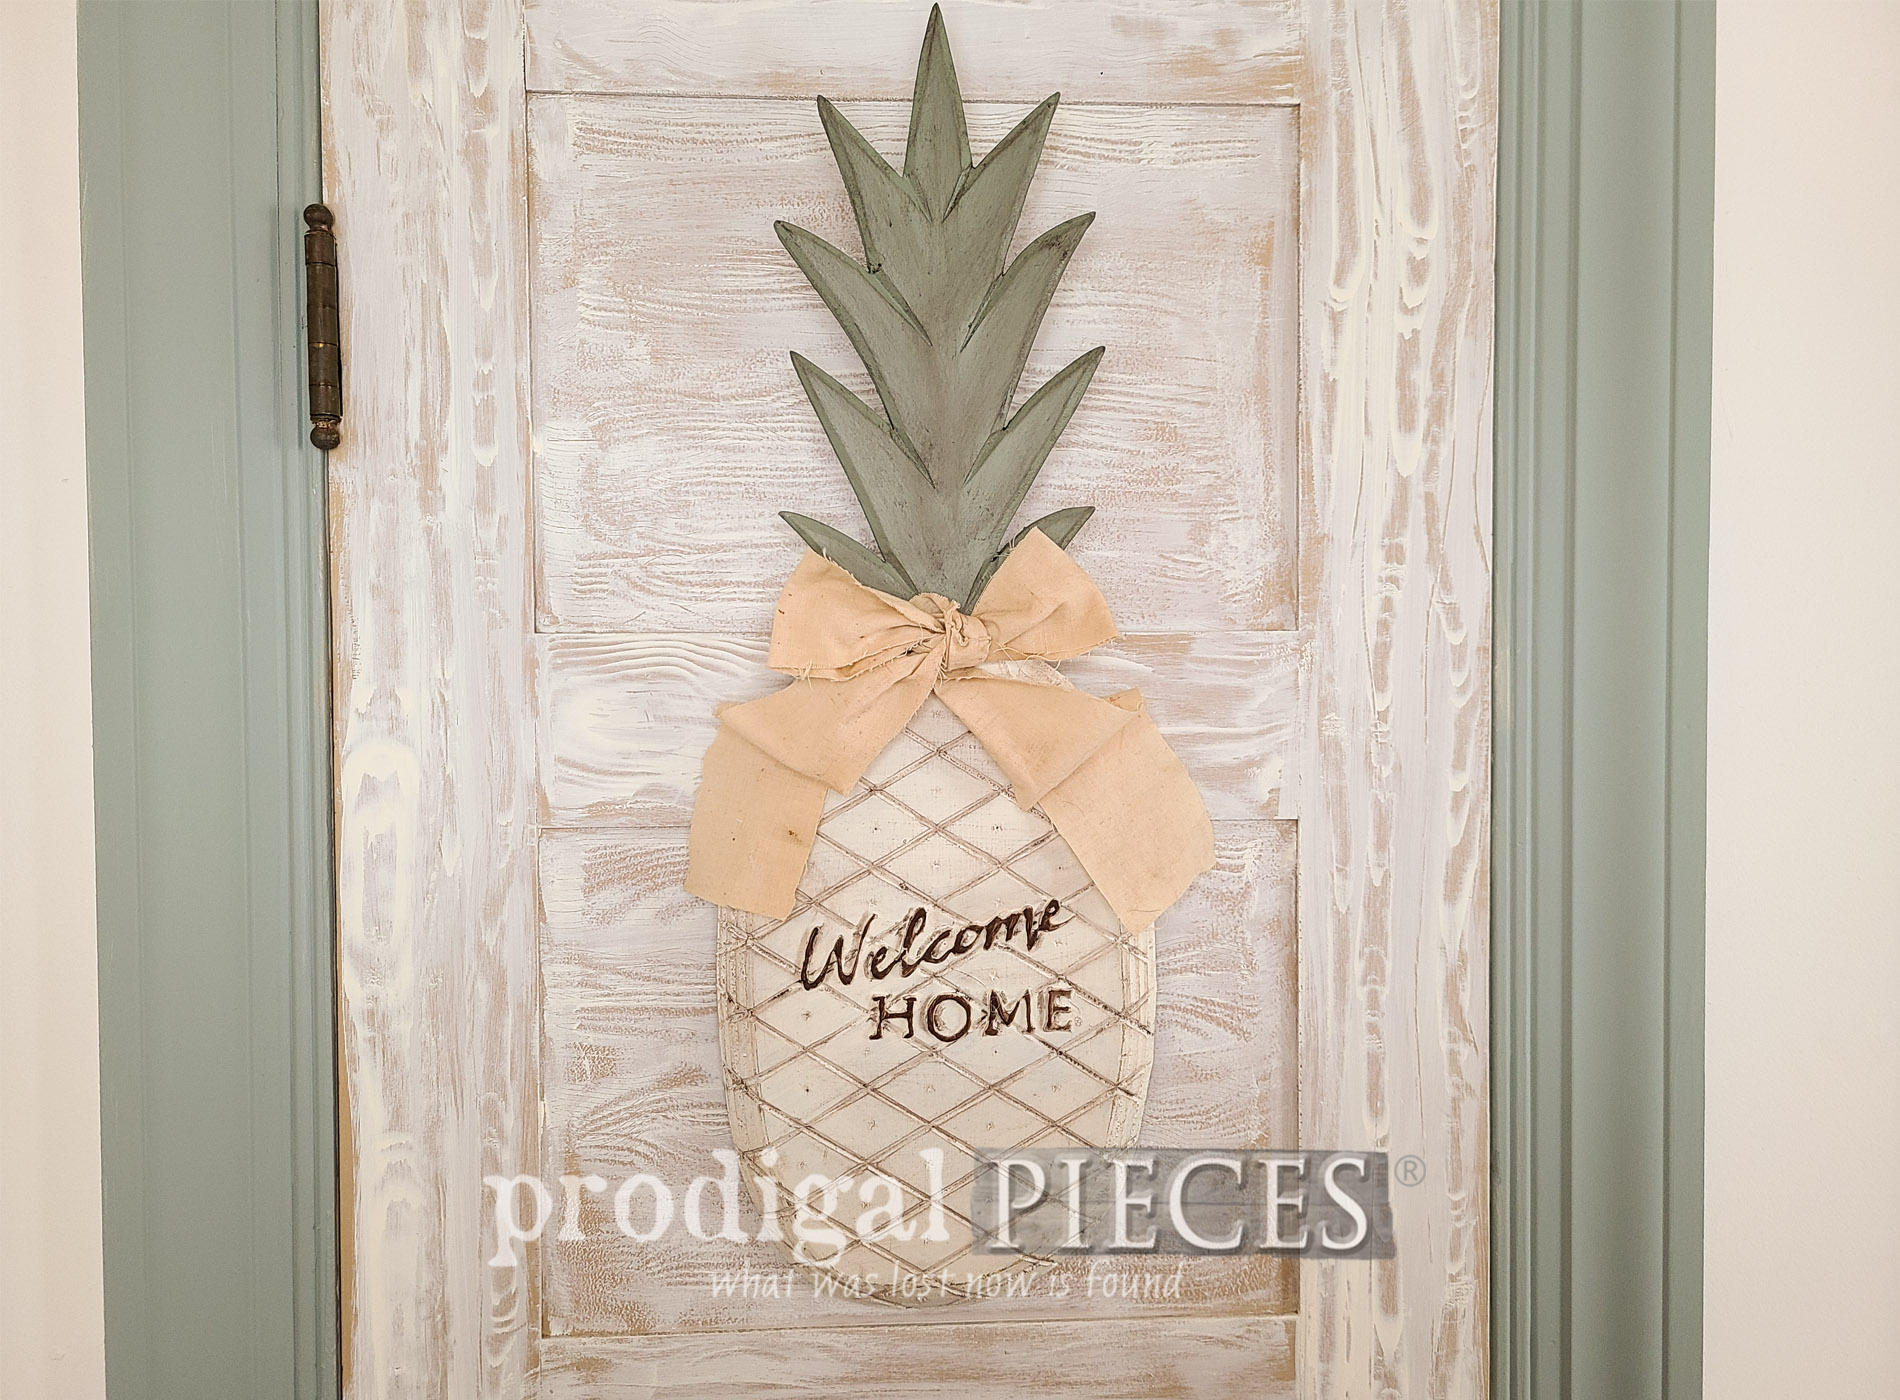 Featured DIY Welcome Sign Pineapple for Home Decor by Larissa of Prodigal Pieces | prodigalpieces.com #prodigalpieces #home #homedecor #thrifted